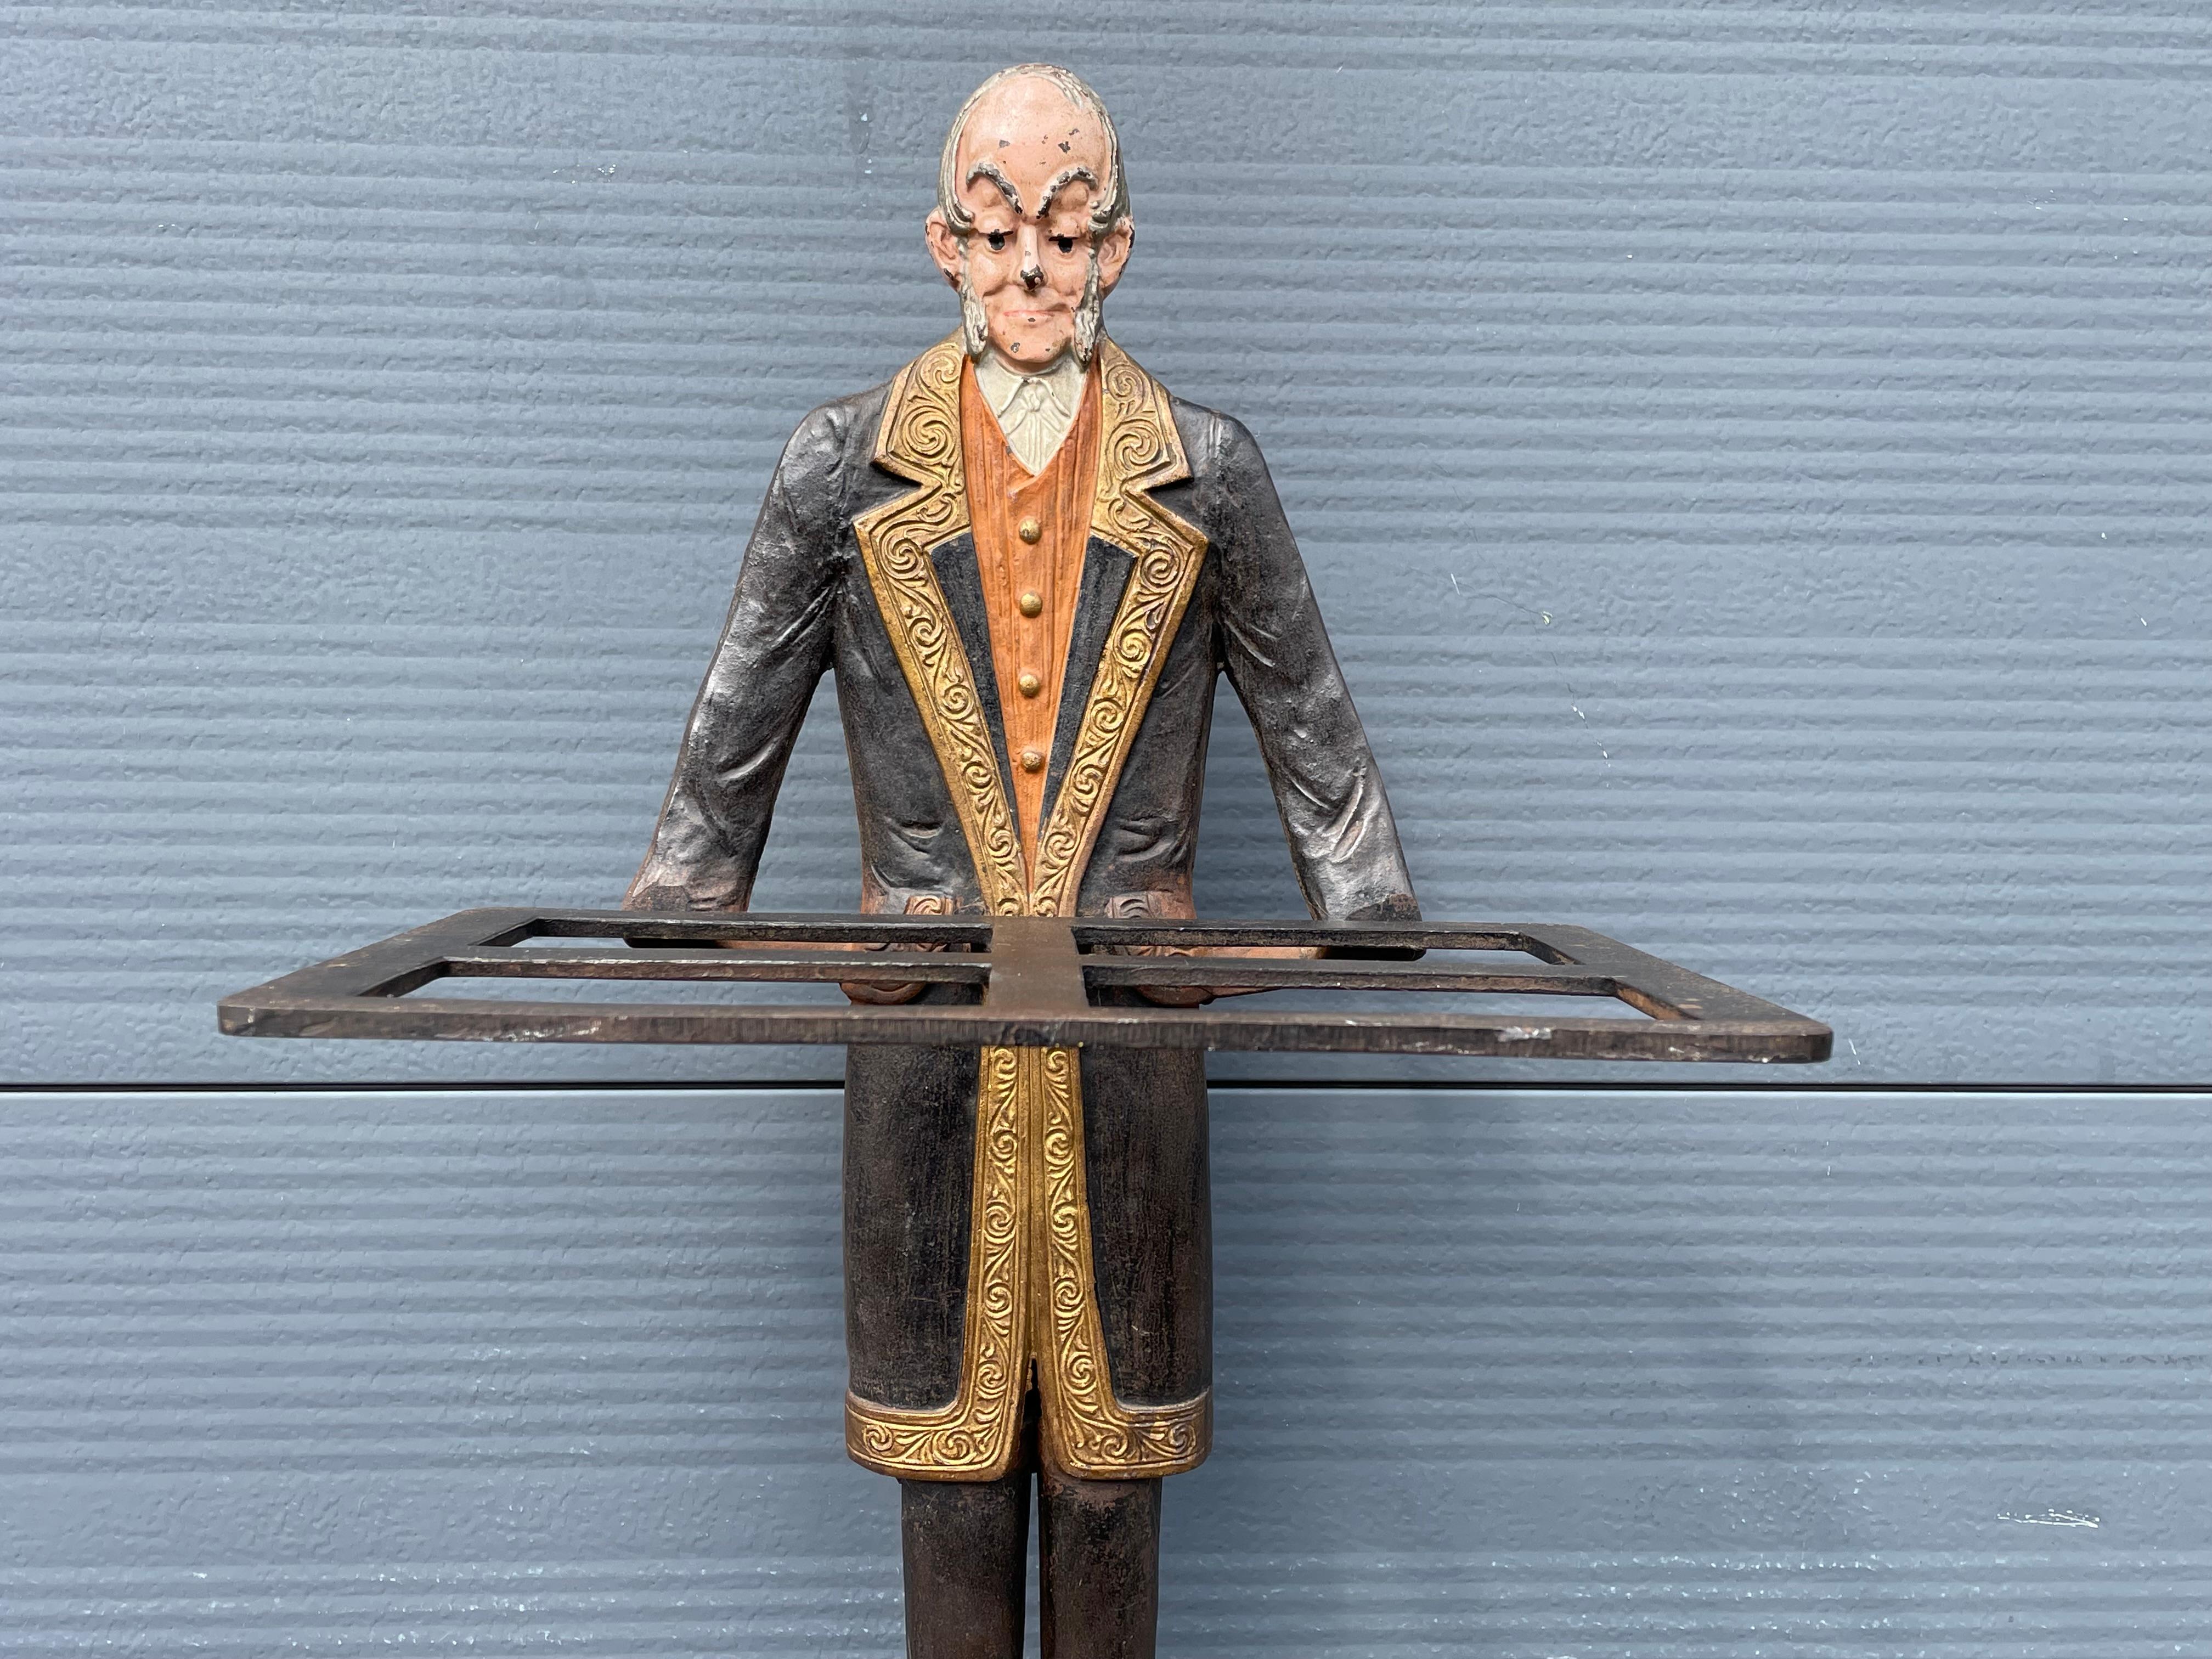 Blackened Art Deco Era, Cast Iron Tray or Umbrella Stand w. Painted Servant Sculpture 1920 For Sale